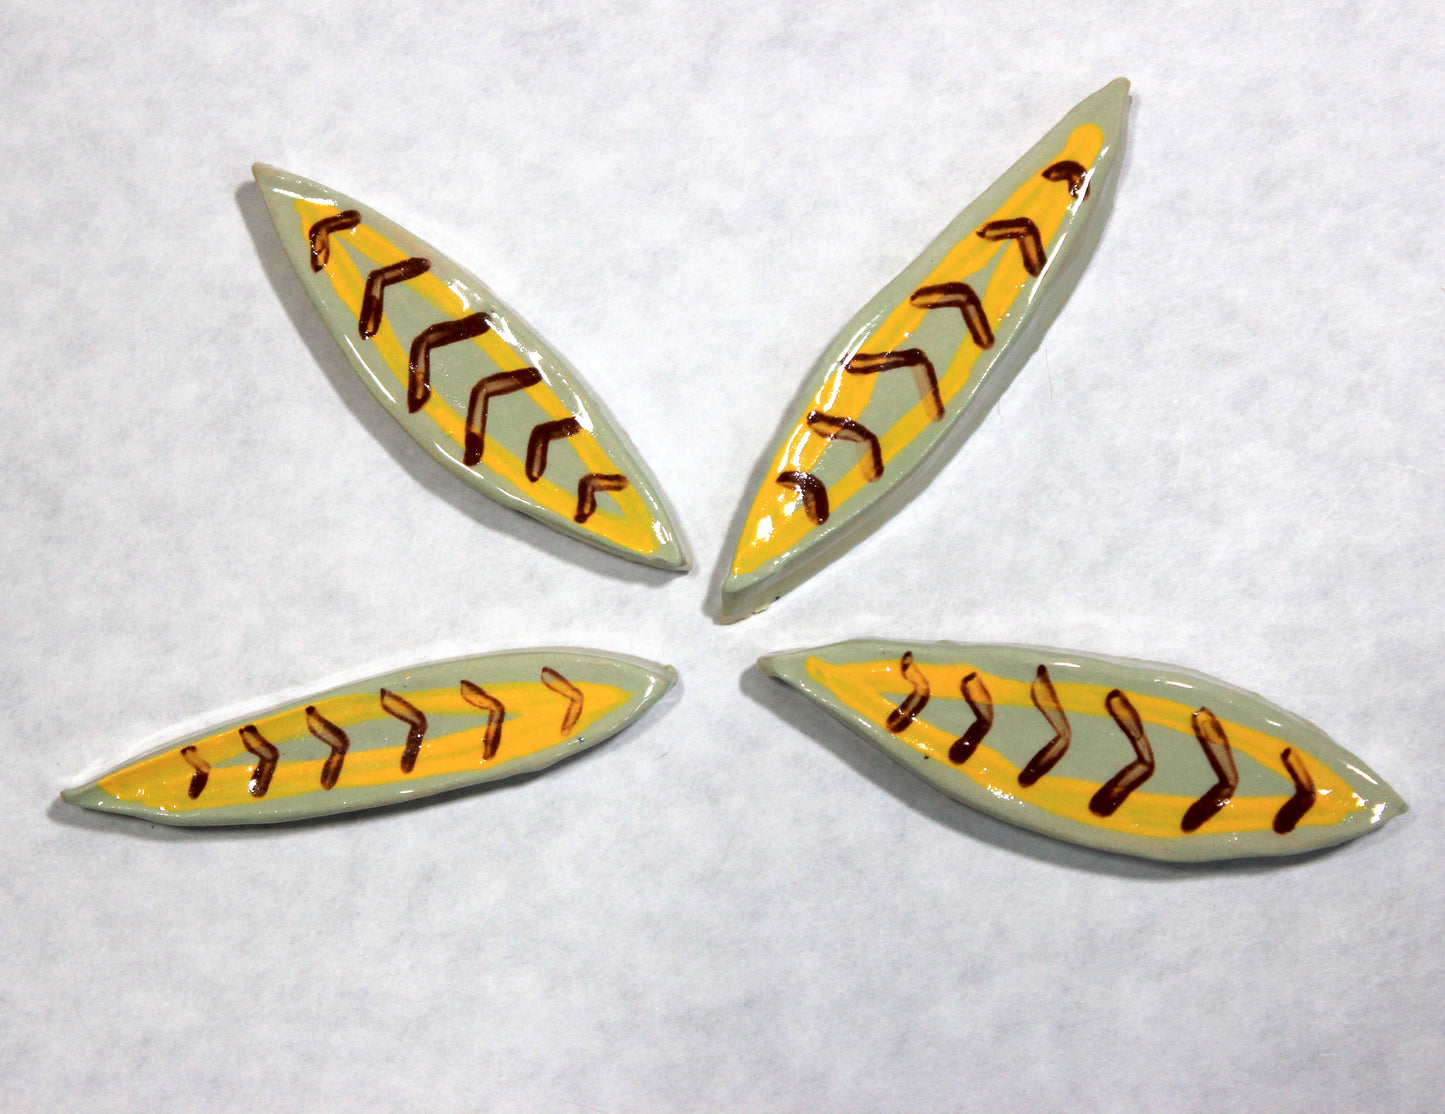 Small Hand-Painted Leaf Tiles for Mosaics and Crafting